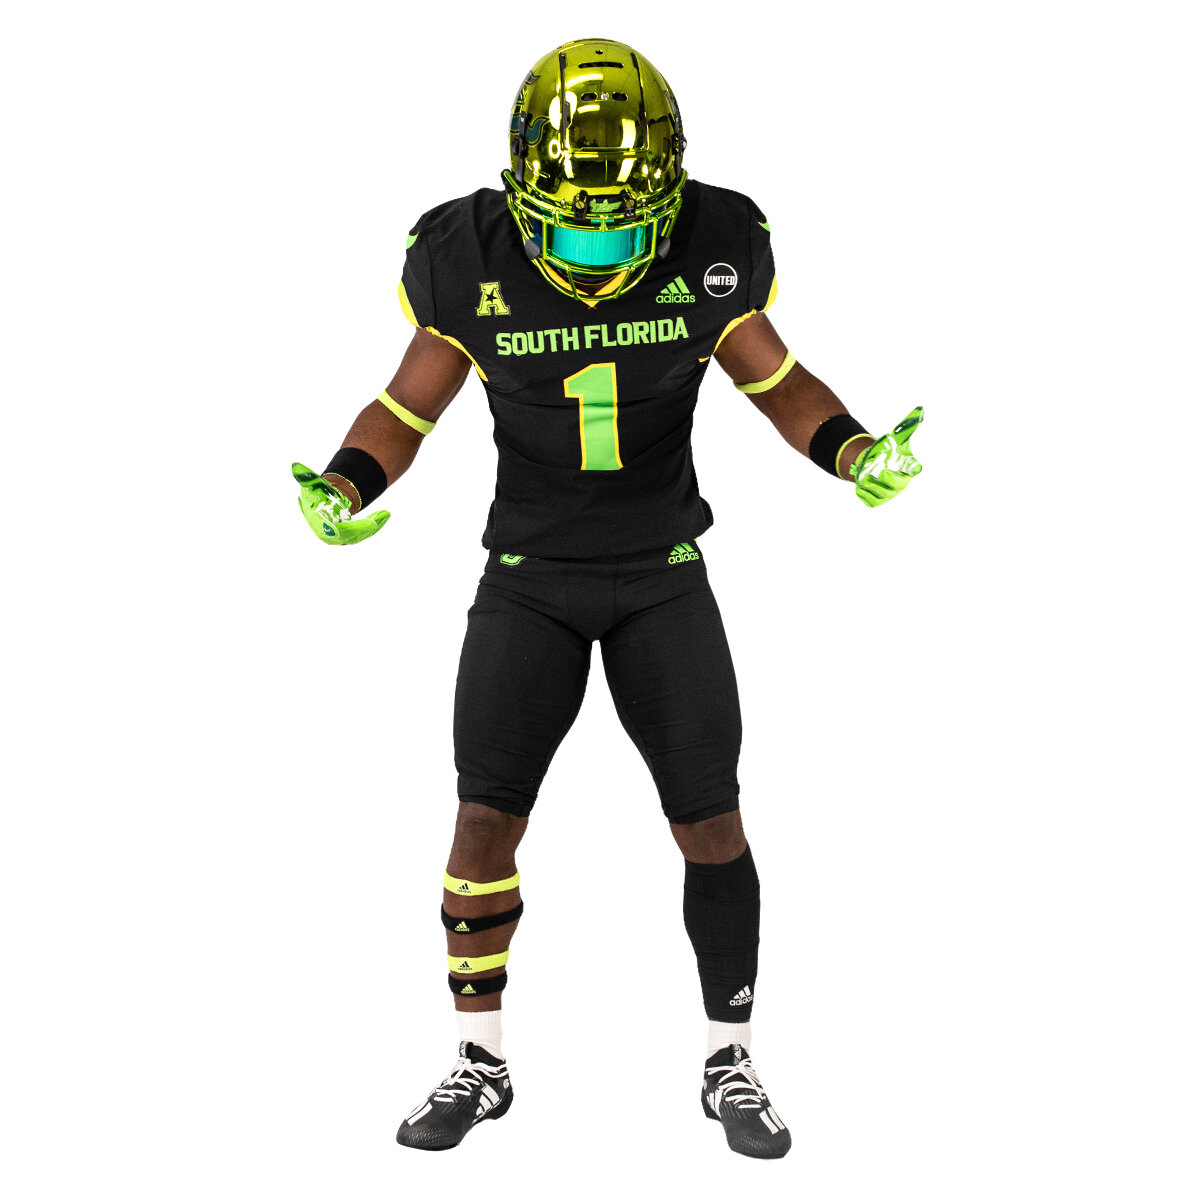 USF announces uniforms for Howard game